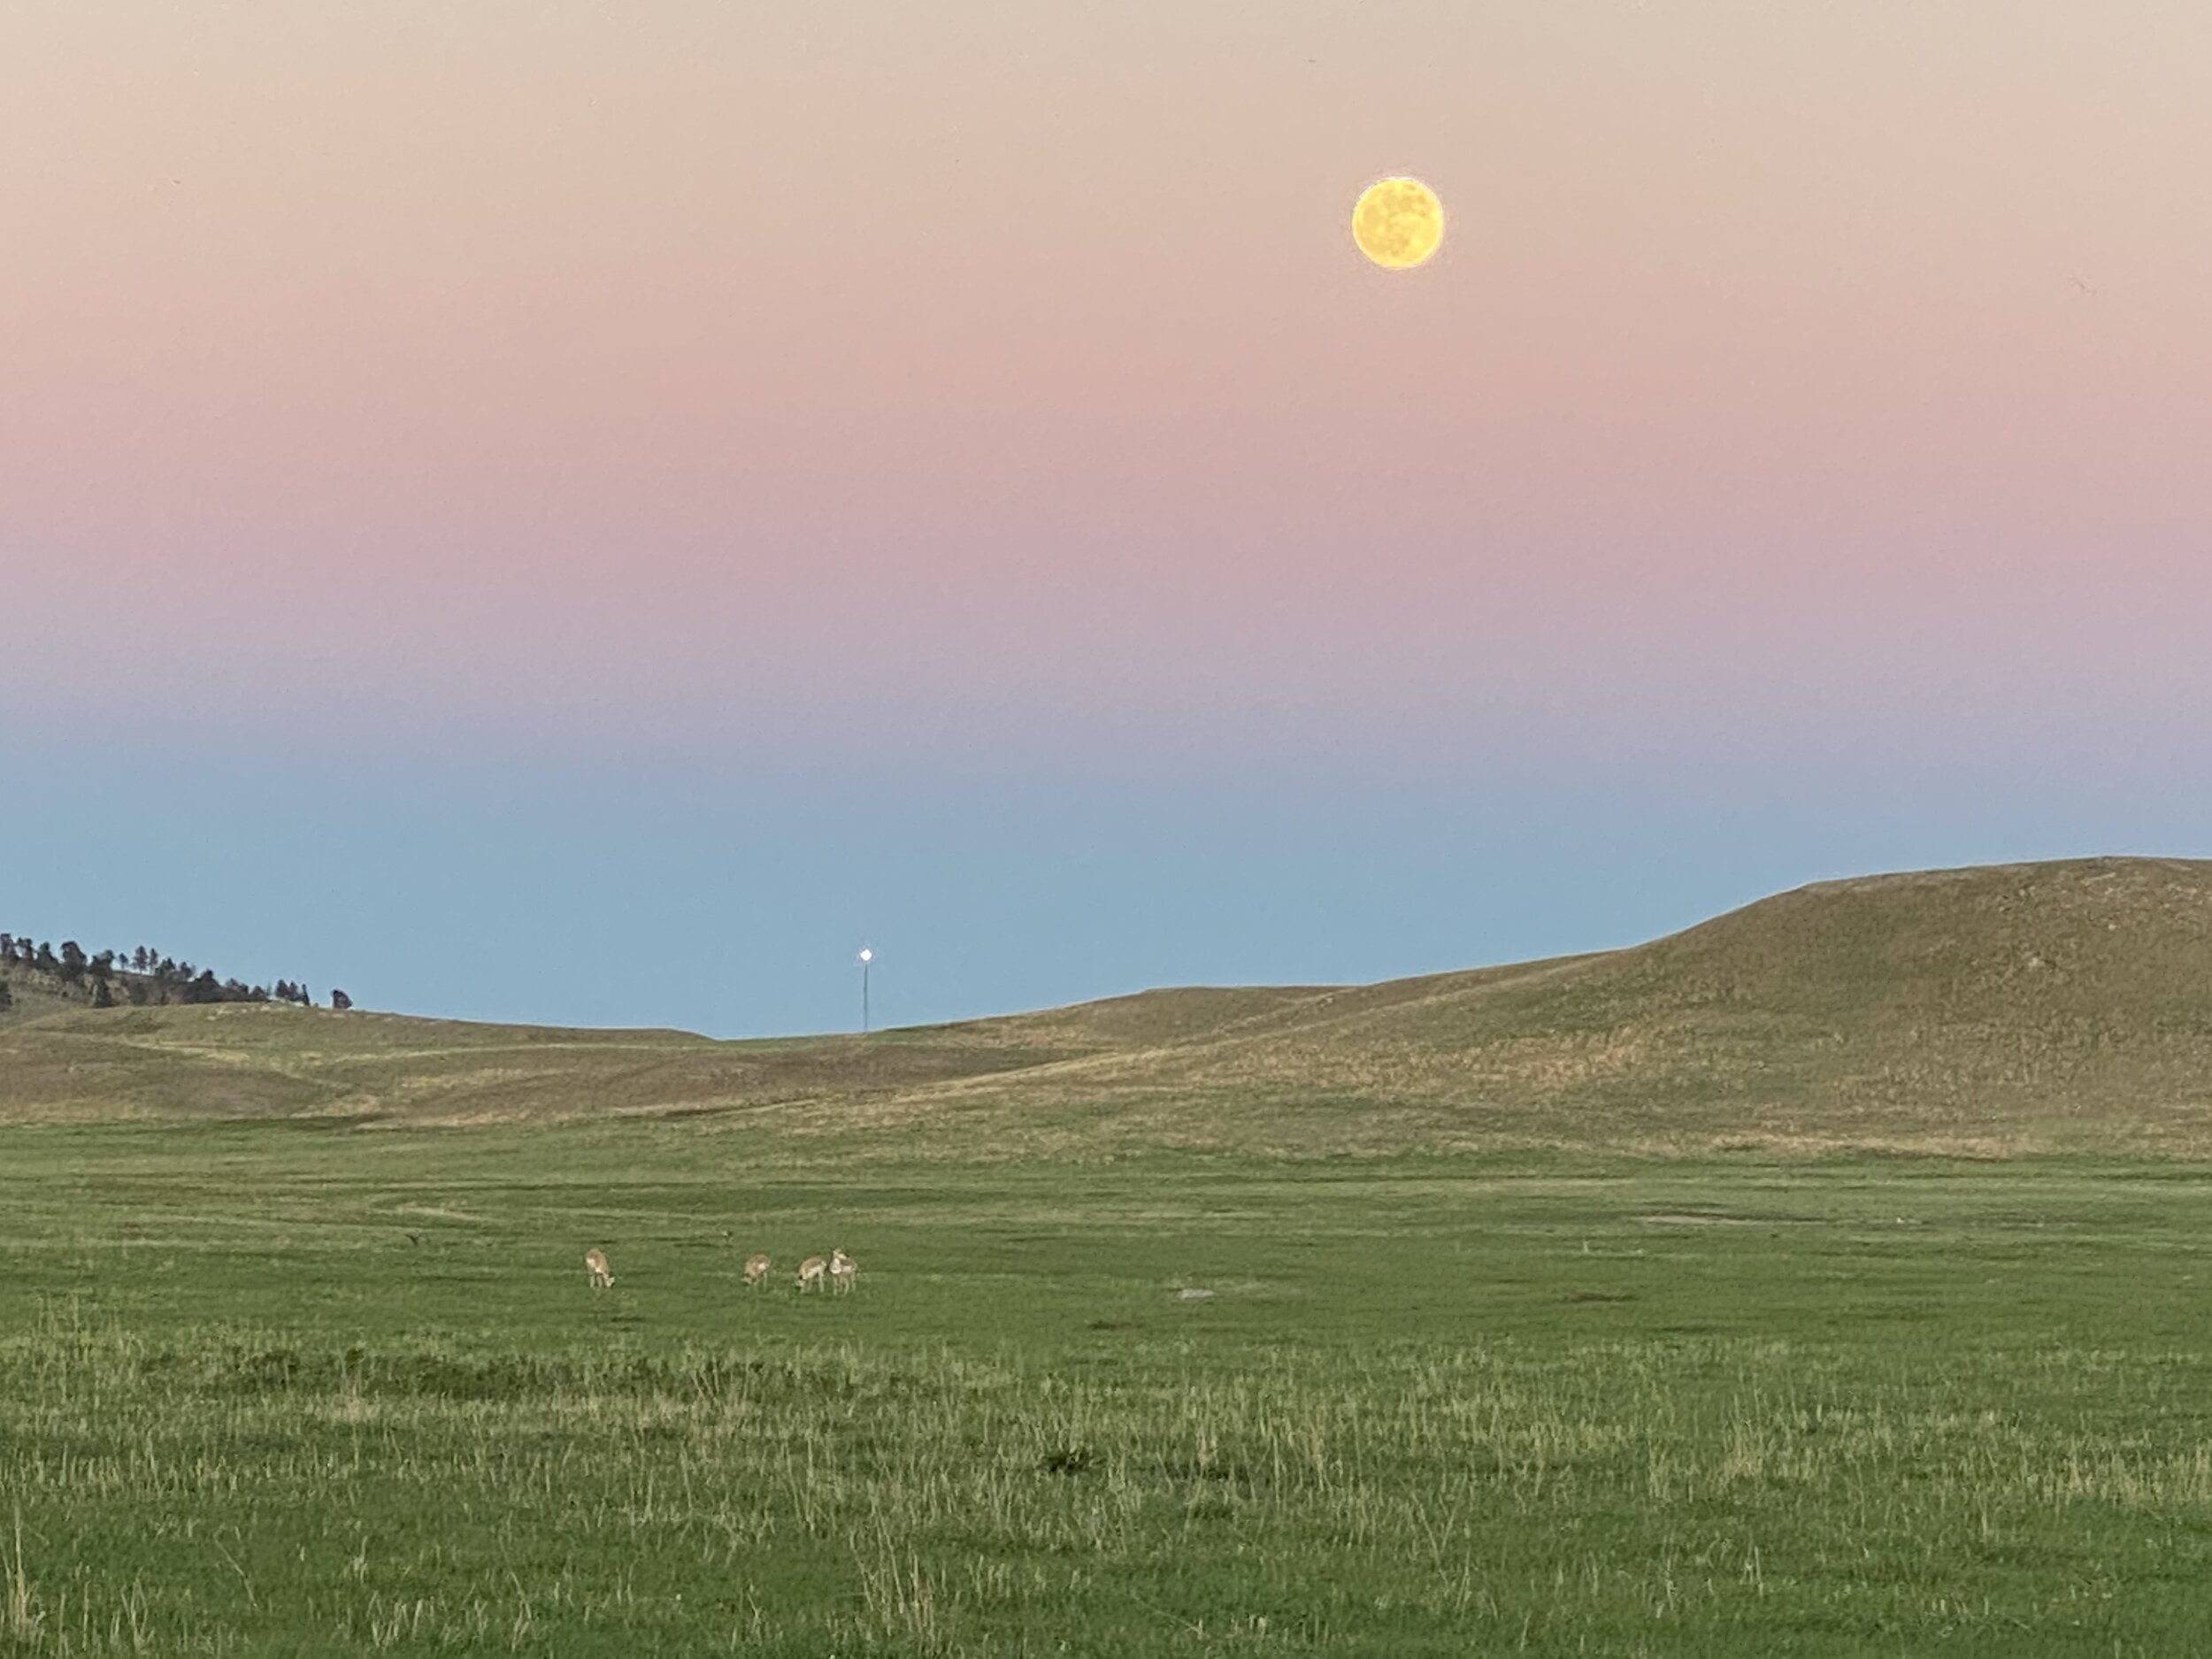 Pronghorn with Rising Full Moon, Custer State Park, SD.  Photo by Karen Boudreaux, 5/25/21